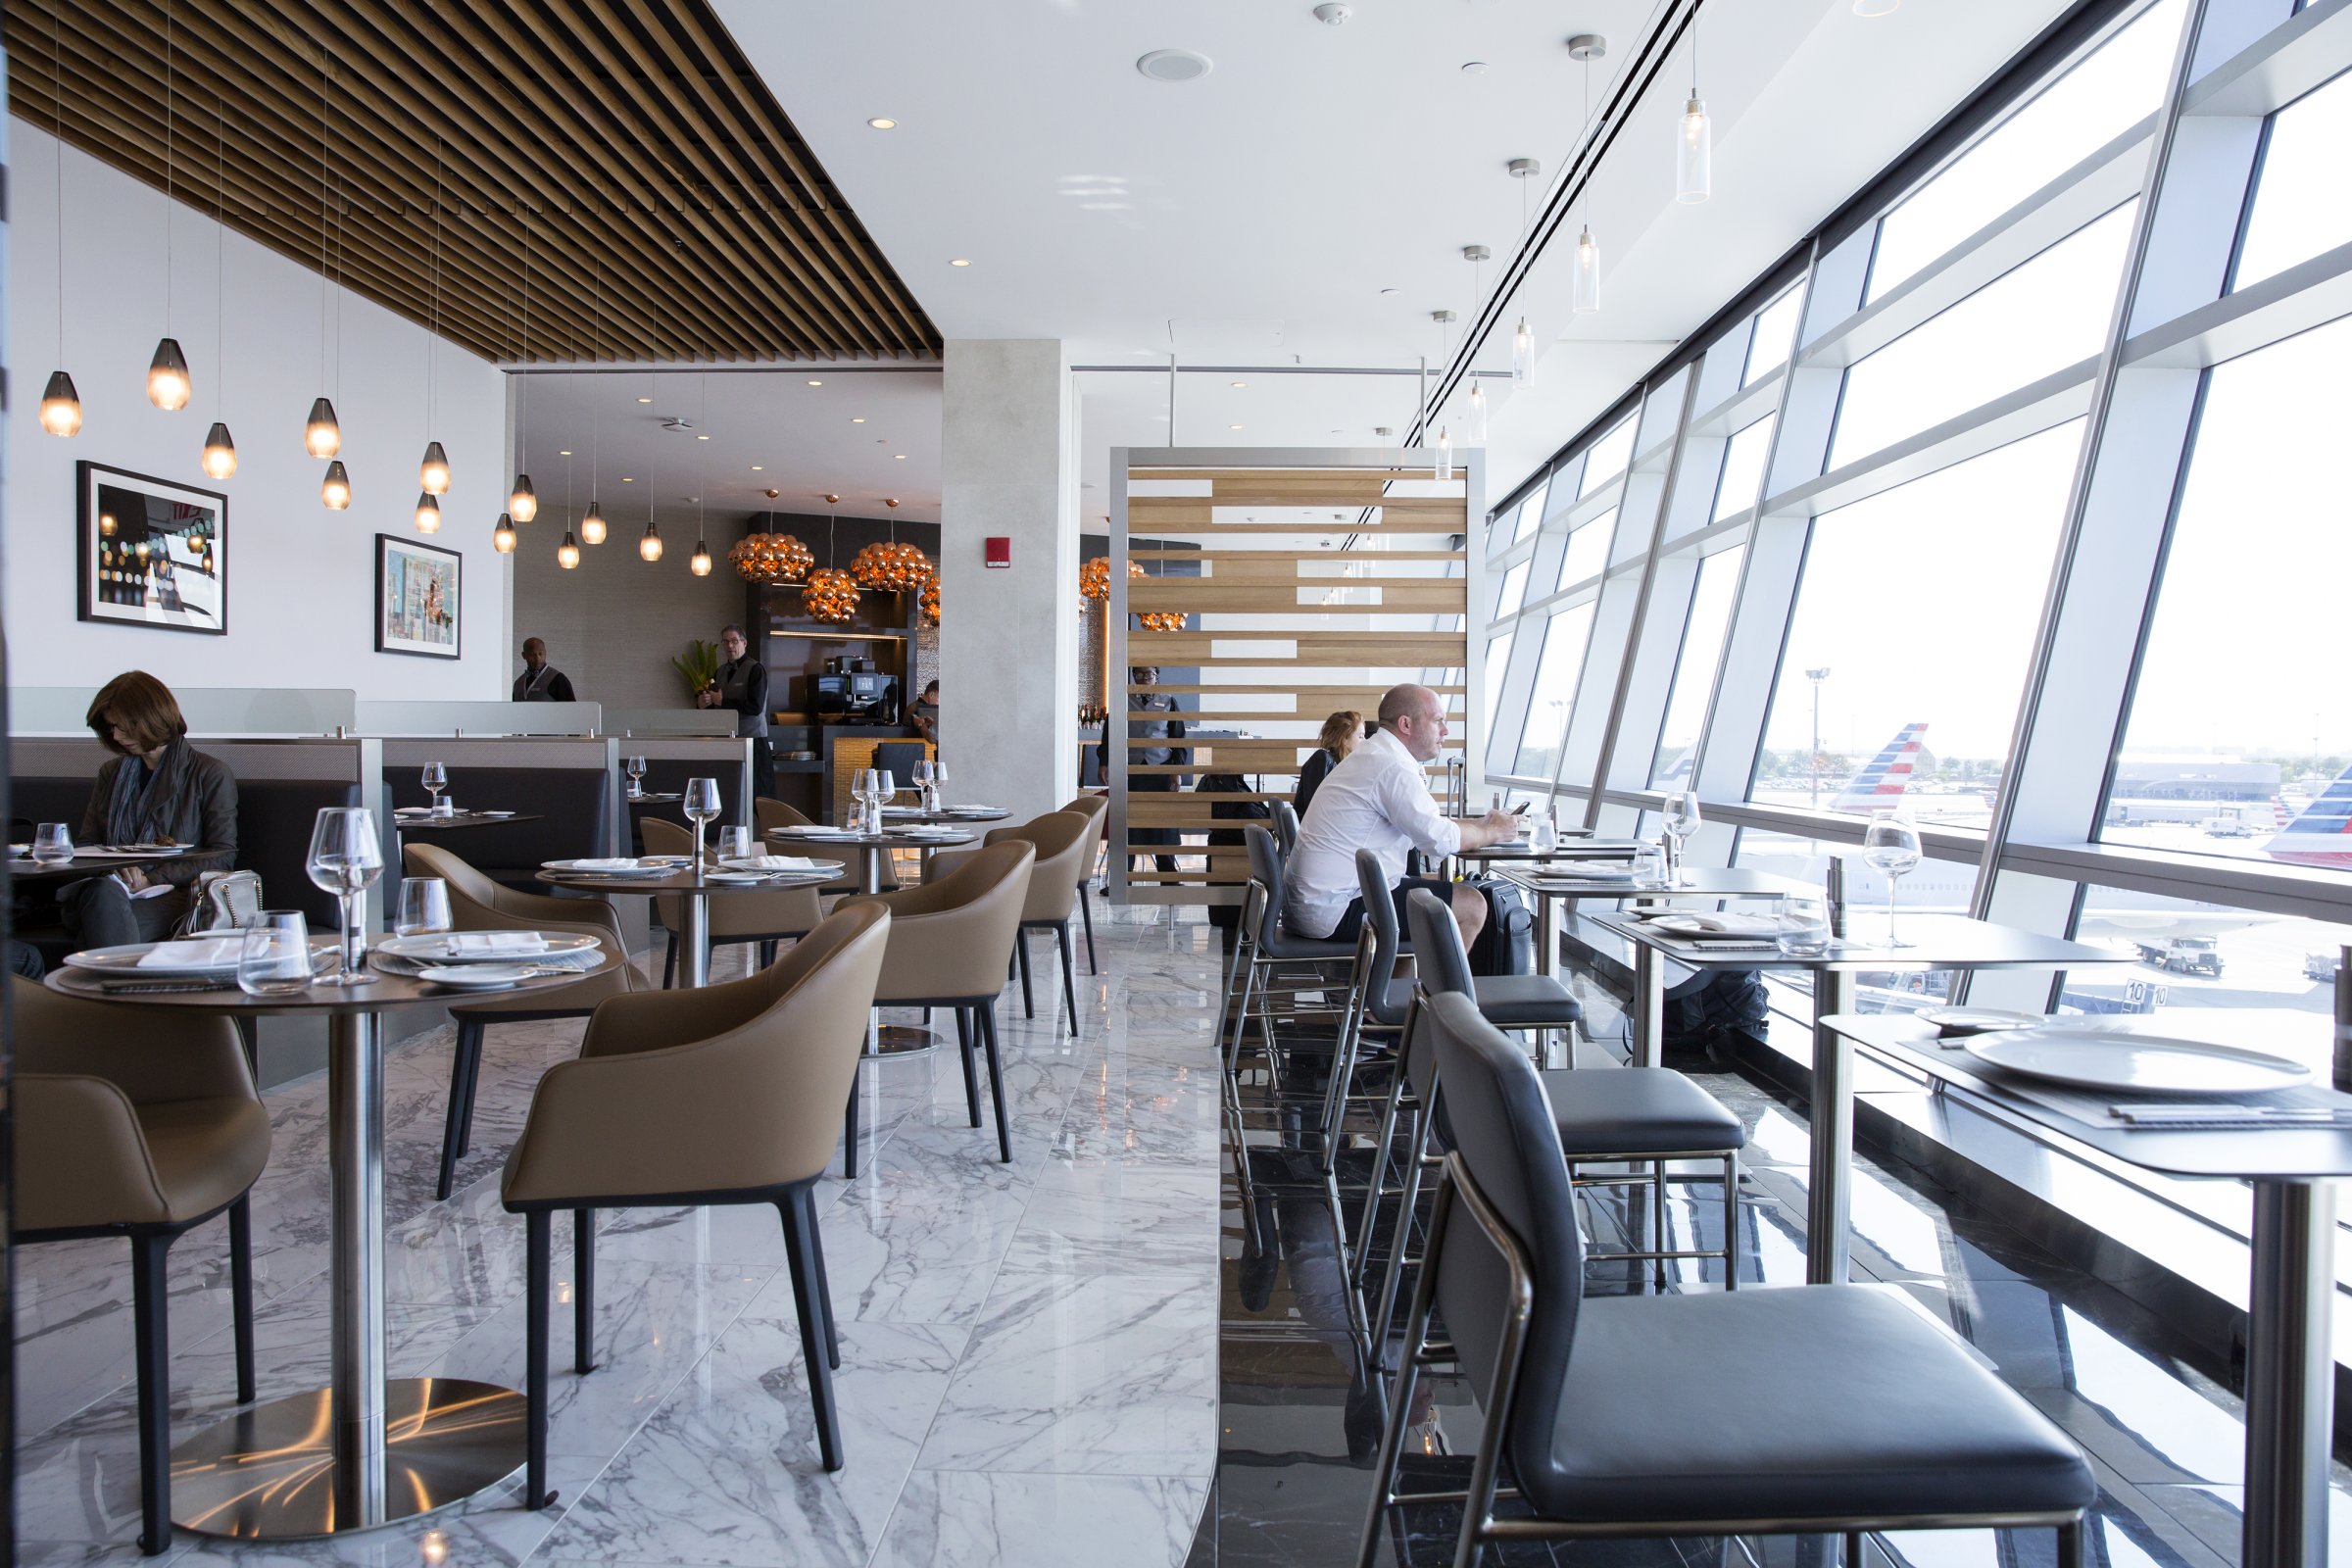 Inside The American Airlines Flagship First Dining Room At JFK Airport